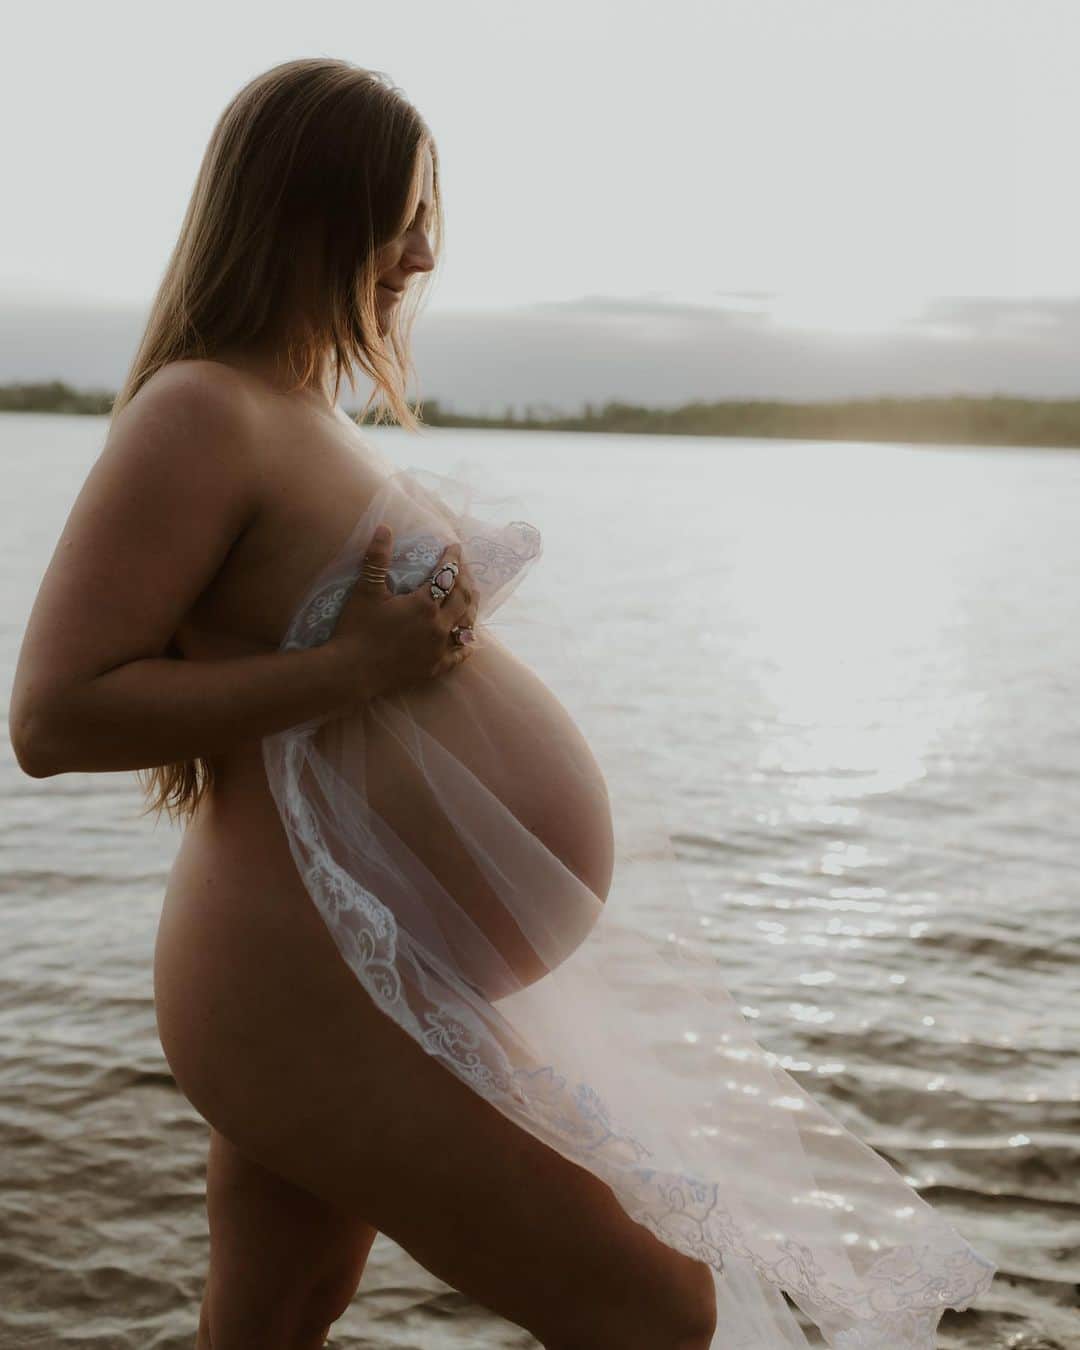 レイチェル・ブレイセンさんのインスタグラム写真 - (レイチェル・ブレイセンInstagram)「41 weeks of pregnancy🌸   Just like his sister, this little guy is not showing any signs of wanting to arrive quite yet and in contrast to my first pregnancy, I feel so, so good. Polar opposite compared to the first time around!  When I reached 41 weeks with Lea I was under so much pressure and stress I wasn’t able to enjoy my last days of pregnancy at all. I was shuffled between hospital visits, ultrasounds and midwives telling me I was a ticking bomb about to implode. Instead of supported I was threatened, coerced, and overall treated as if I was sick and like there was something truly wrong with me (when in fact I was a completely healthy and thriving 28-year old, with a healthy and thriving baby in my womb!). When I reached 41 weeks and refused to be induced, an OBGYN actually asked me “if I wanted my baby to live”. I mistakenly thought I would be able to have a natural pregnancy and birth experience while still committing myself to a medical system that is not only built on a foundation of deep misogyny, but designed to pathologize and medicalize what is actually the most vibrant, thriving time of a woman’s life.  This pregnancy is so very different. 41 weeks feels like a walk in the park (it basically is!). I’m spending my days by the lake; resting, swimming, reading, drinking tea… Been foraging a bit, nesting tons, I go for a dip down by the dock several times a day and am mostly just walking around the land, enjoying the absolute marvel of nature. I keep looking up at the trees, finding myself in such awe of it all that I can’t help but to say thank you out loud.   Of course I oscillate between big feelings and thoughts; what will labor be like? When will I feel those first sensations? Can I really do this? Every day I cycle through some sort of conditioned fear that doesn’t belong to me and was never mine in the first place. Again and again, I arrive at a place of peace. Everything is so incredibly beautiful. My body. My baby. Our family. This place. This pregnancy.   I feel so lucky. Soon he’ll be in my arms and I’ll look back at this time as some of the most beautiful weeks of my entire life💛 #wildpregnancy   📸: @naomivonkphotography」6月13日 23時29分 - yoga_girl